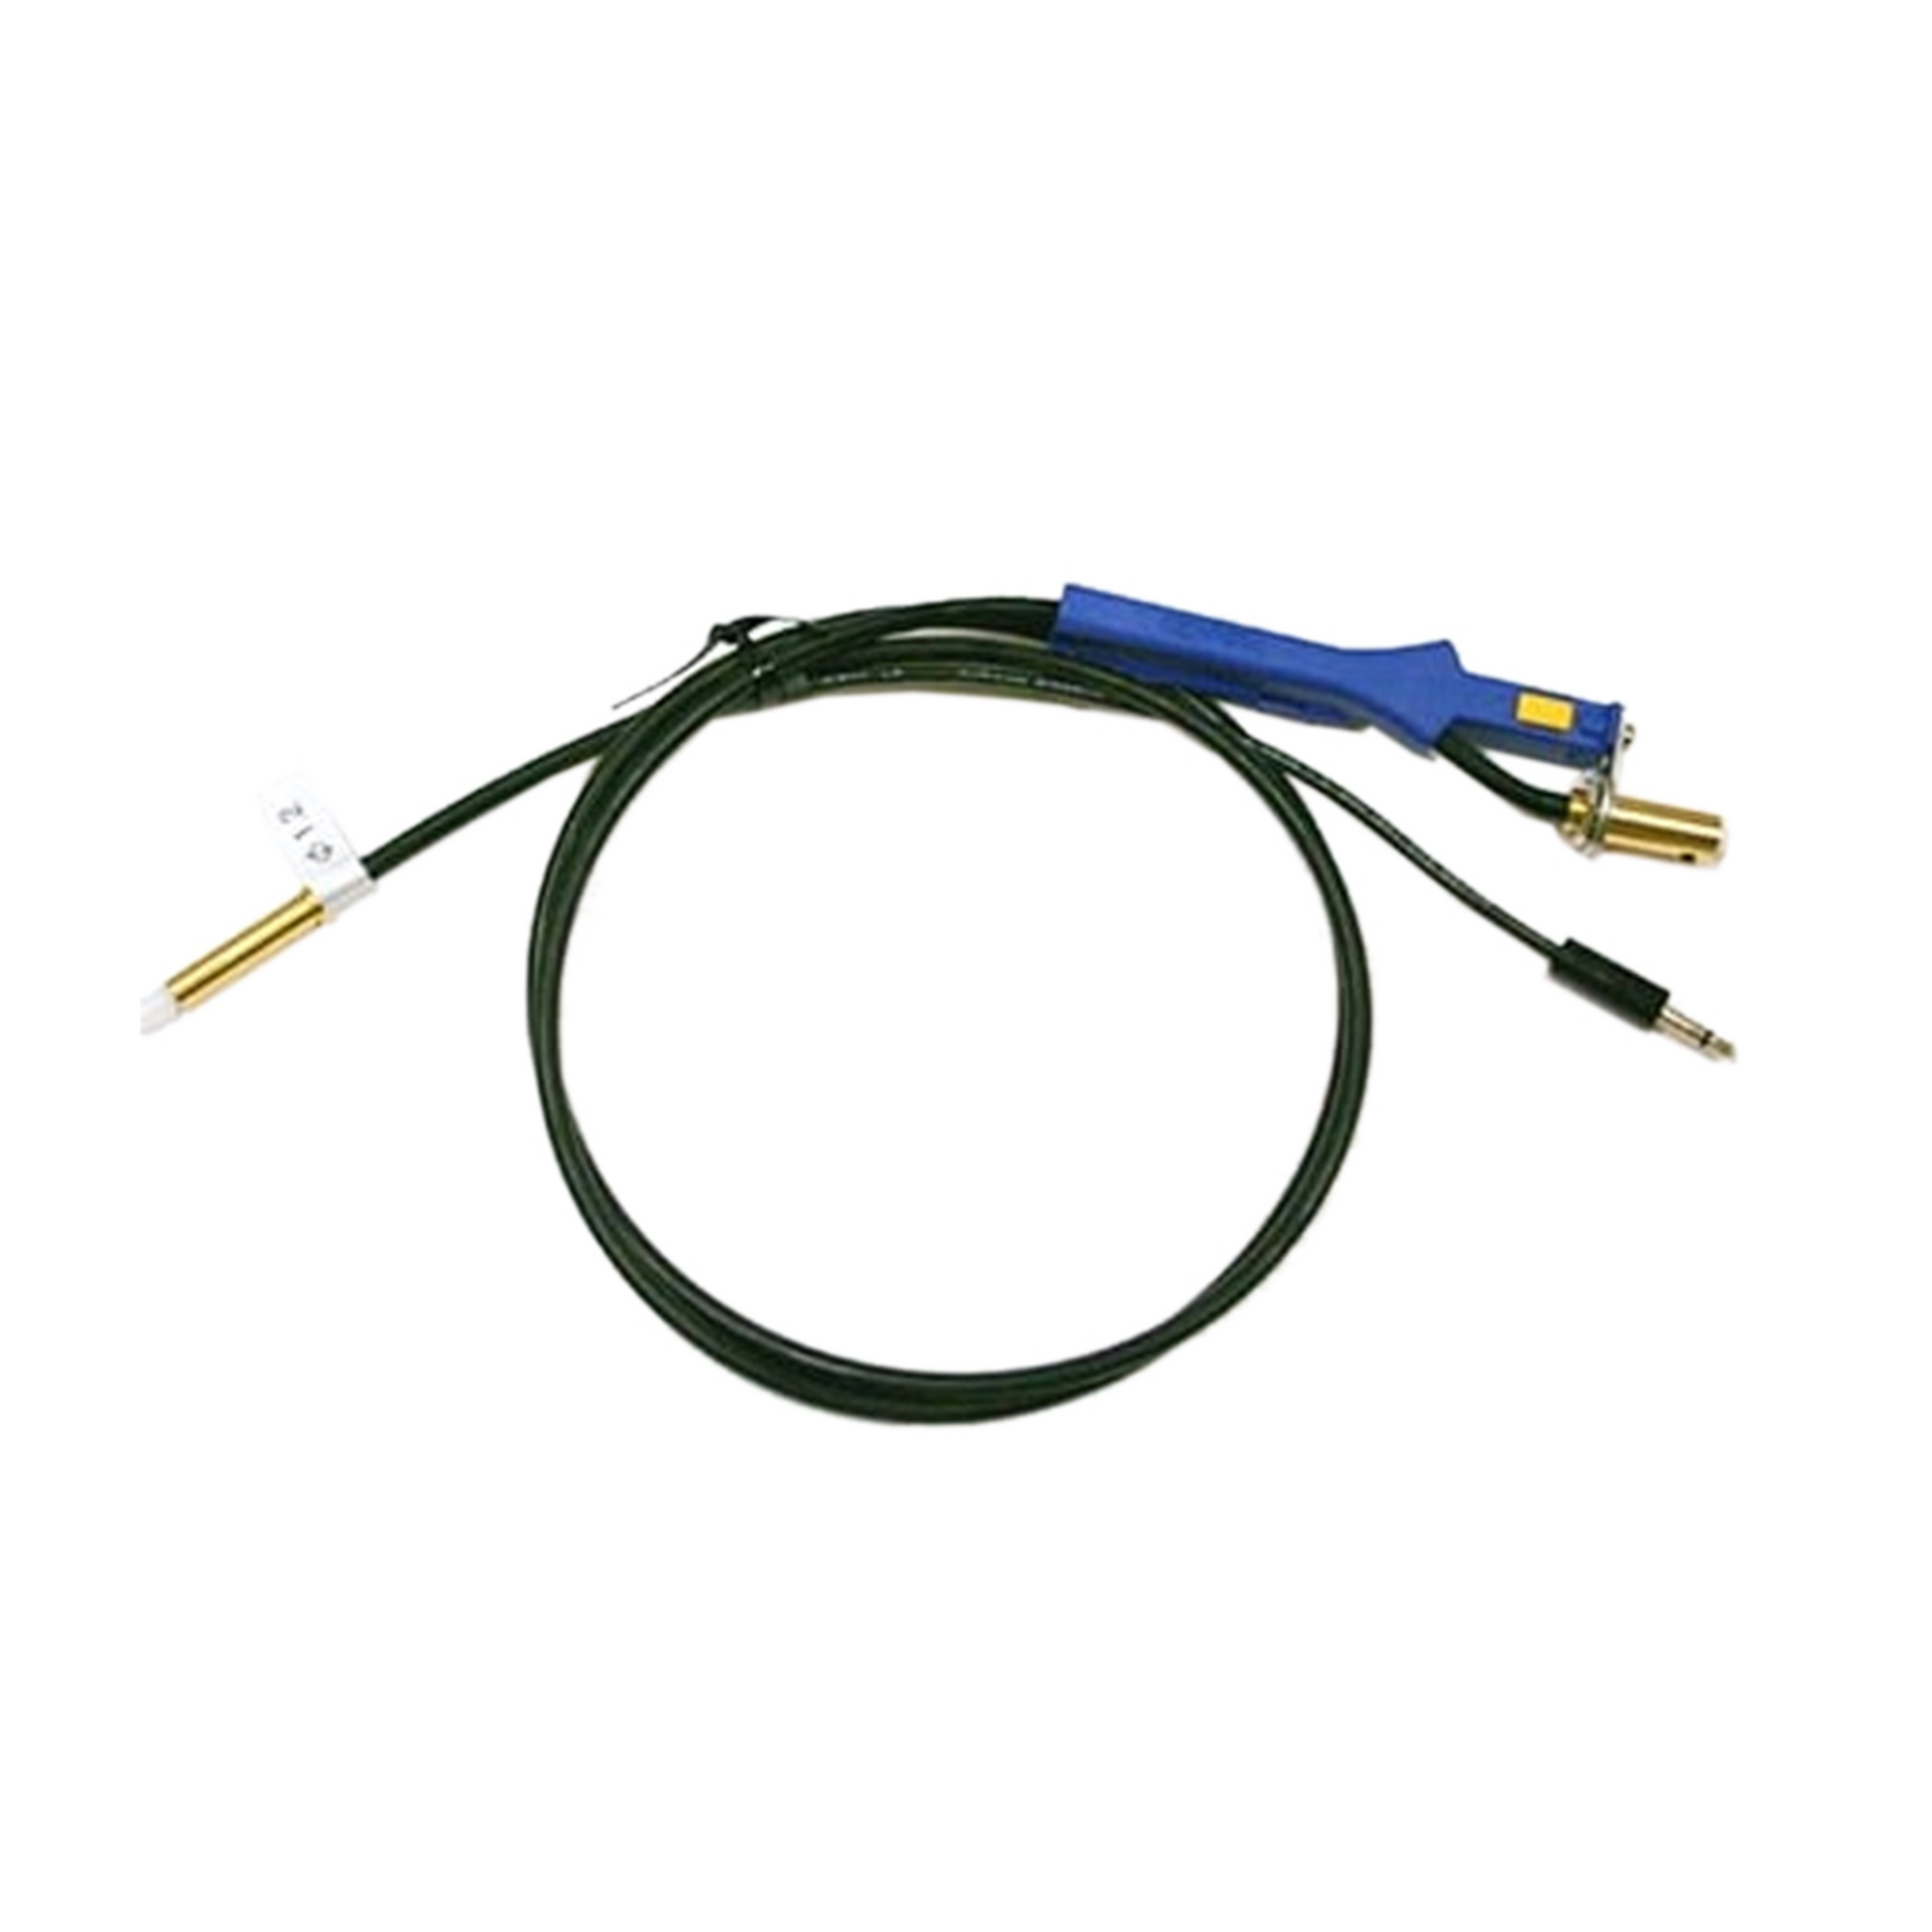 Hakko Products_ B3478 Tube Assembly N 1.2mm with Switch_ Soldering Accessories_ Hakko Products